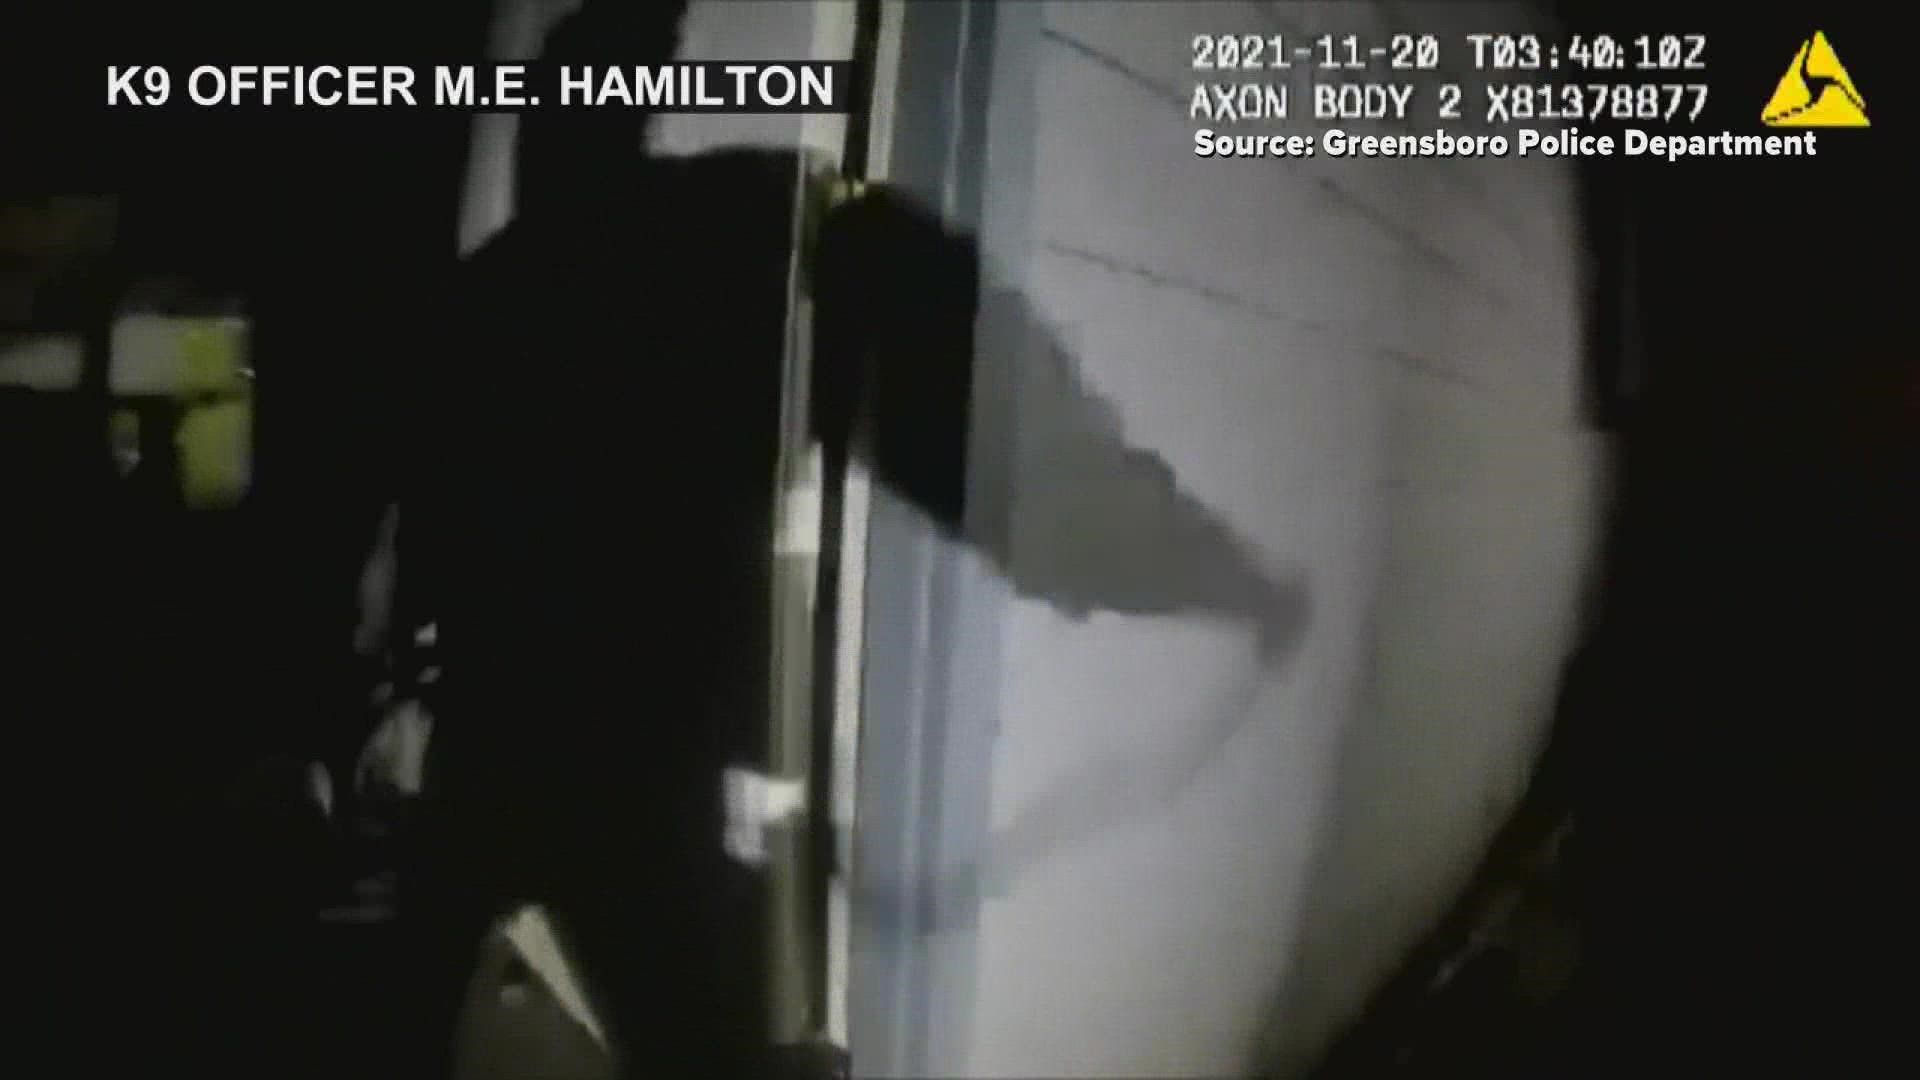 The video showed the moments before, during and after the shooting involving former officer Matthew Hamilton and Joseph Lopez.